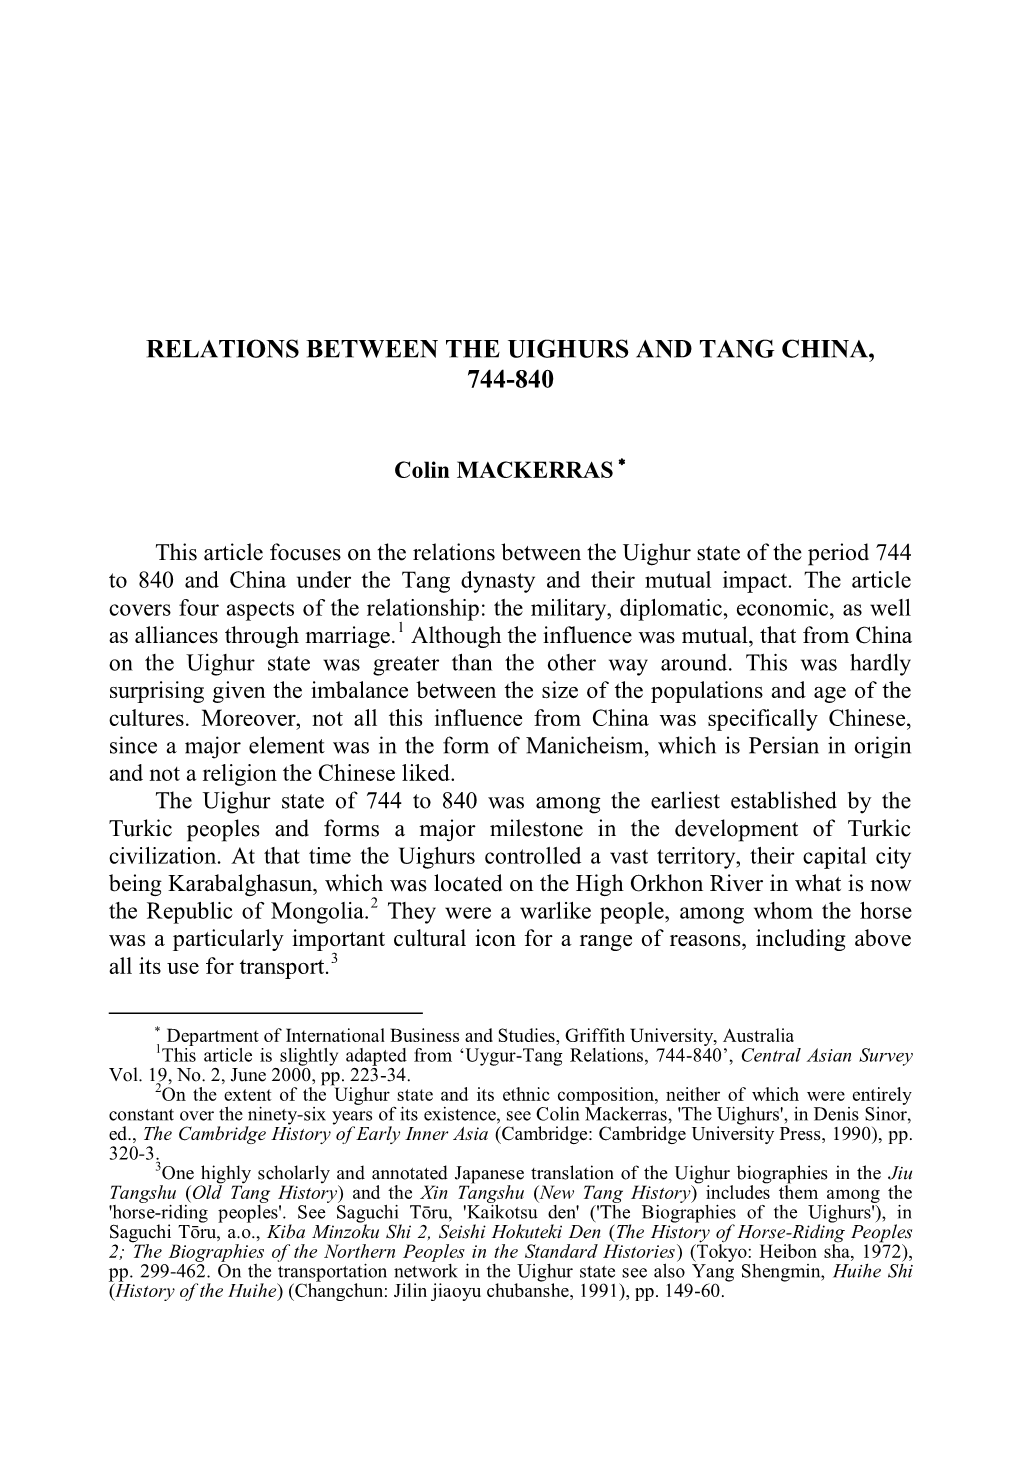 Relations Between the Uighurs and Tang China, 744-840